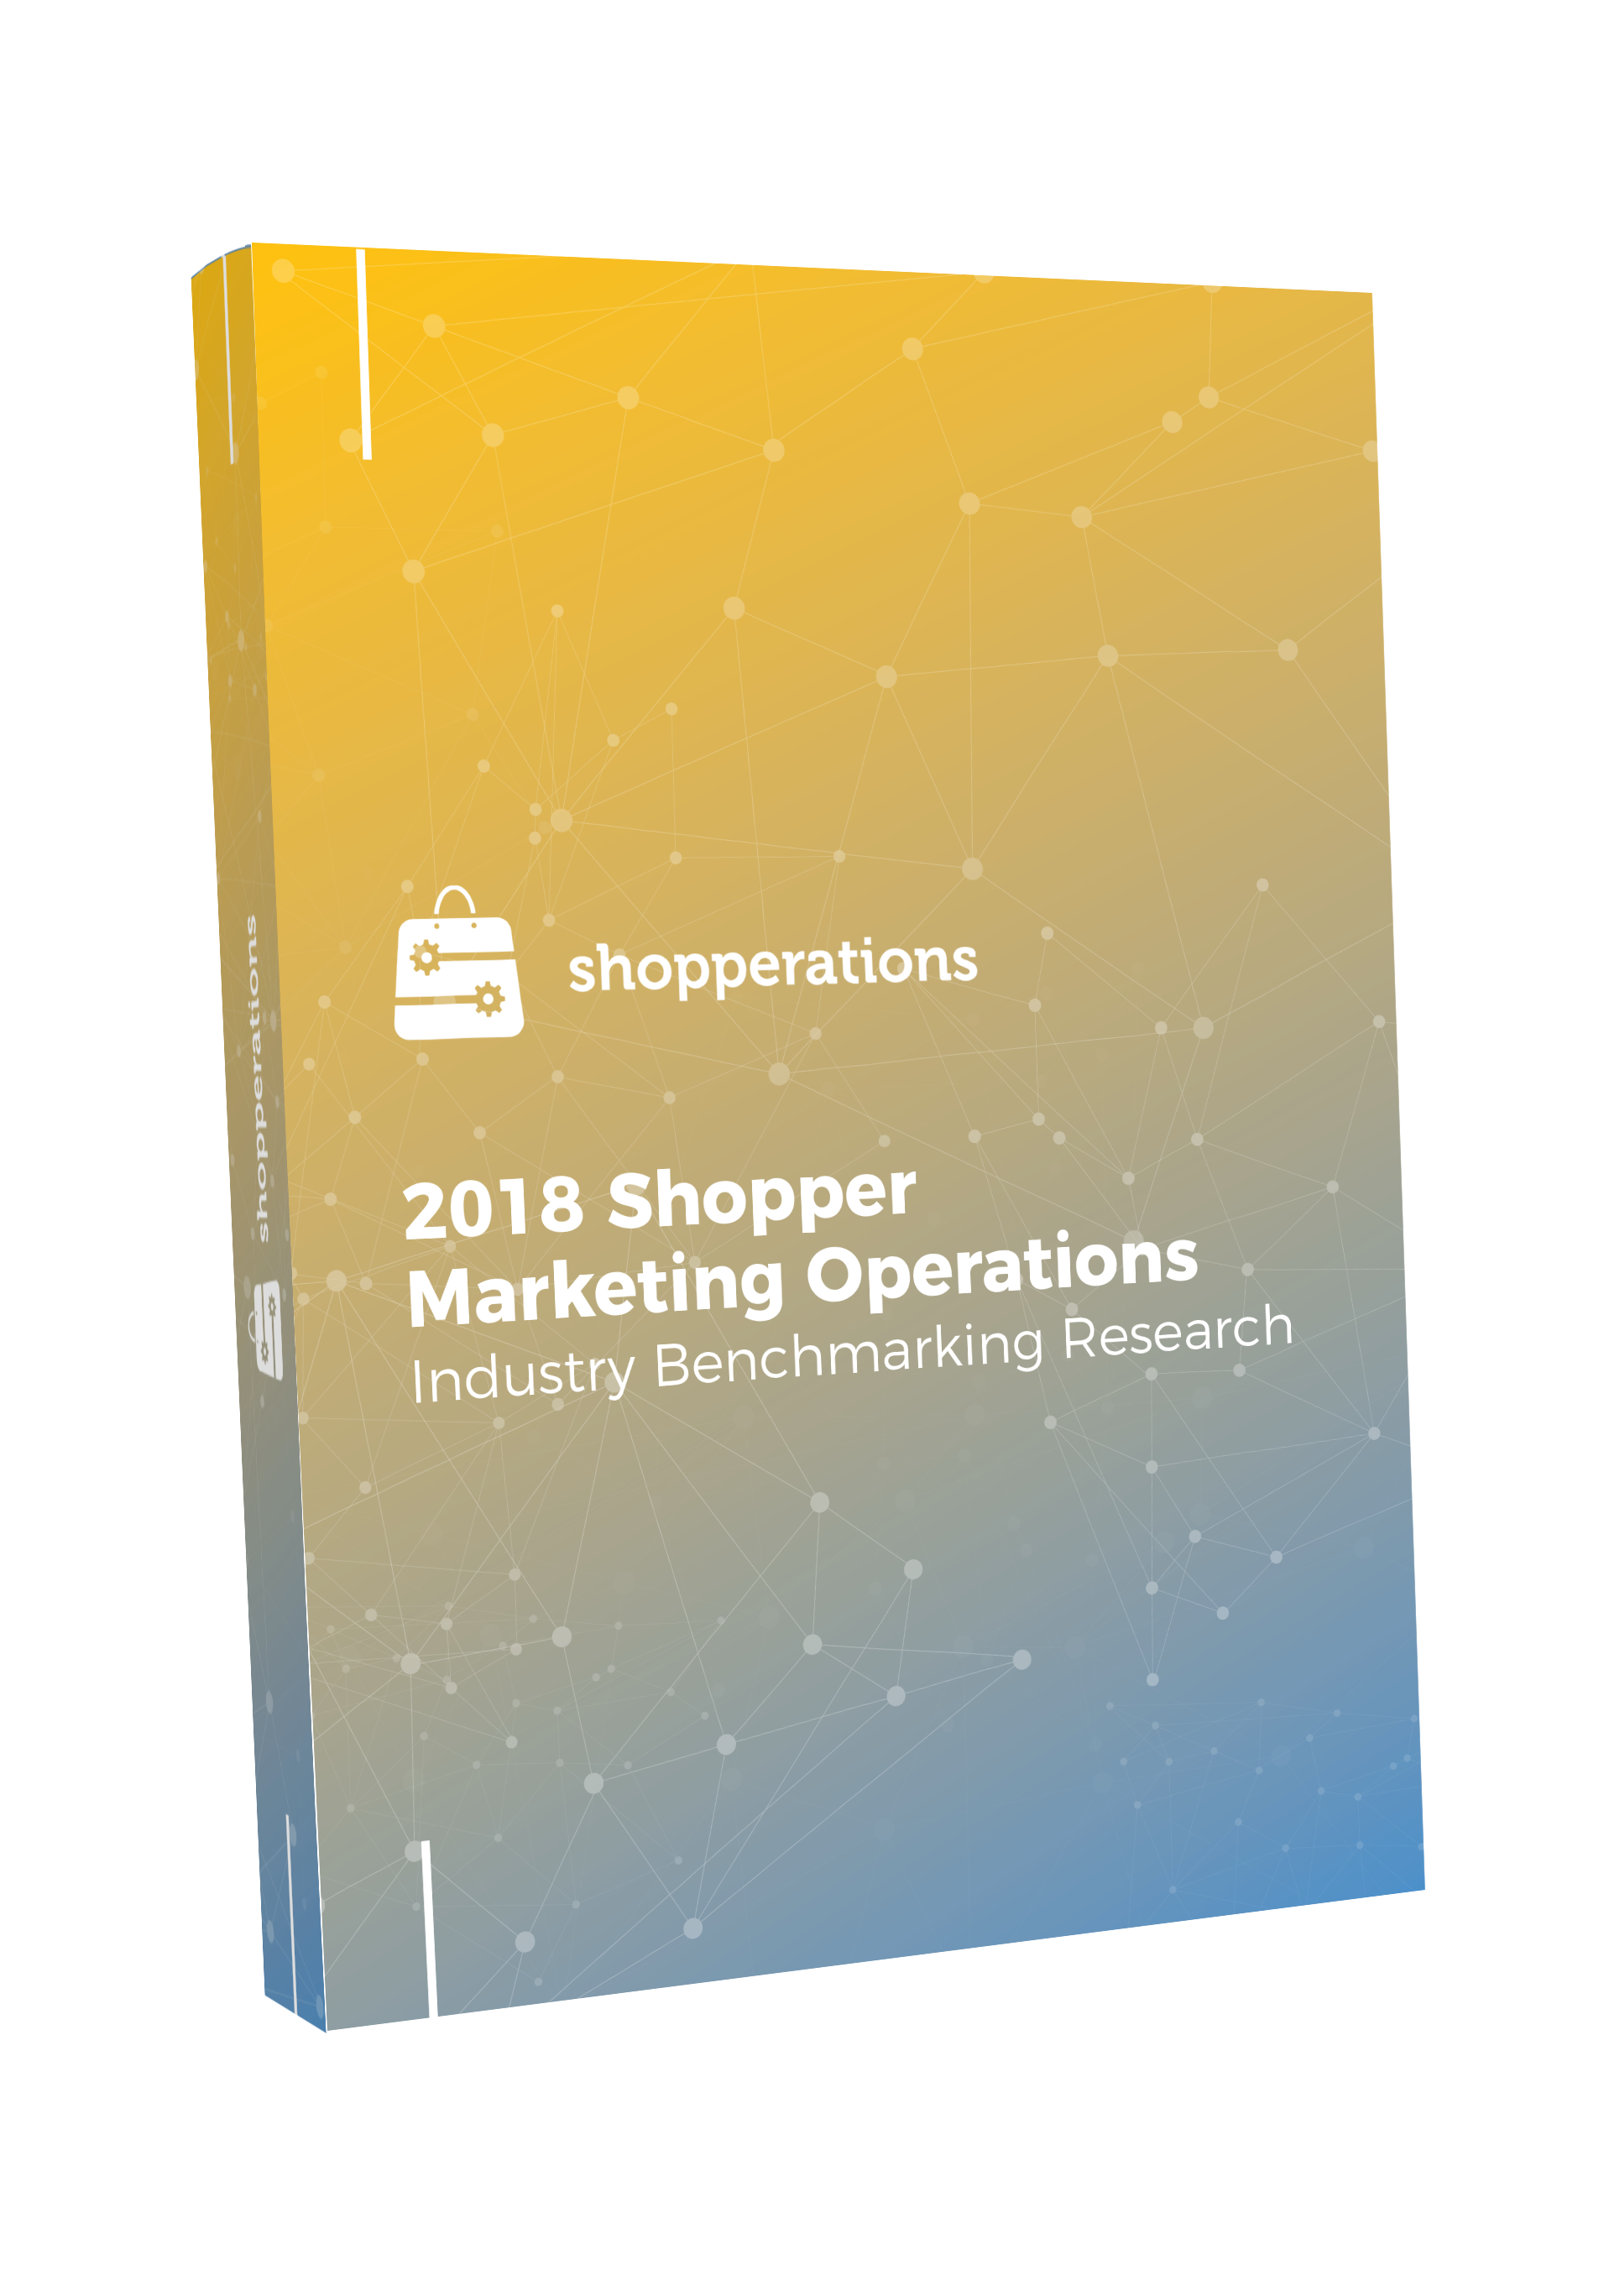 2018 Shopper Marketing Operations Industry Benchmarking Research